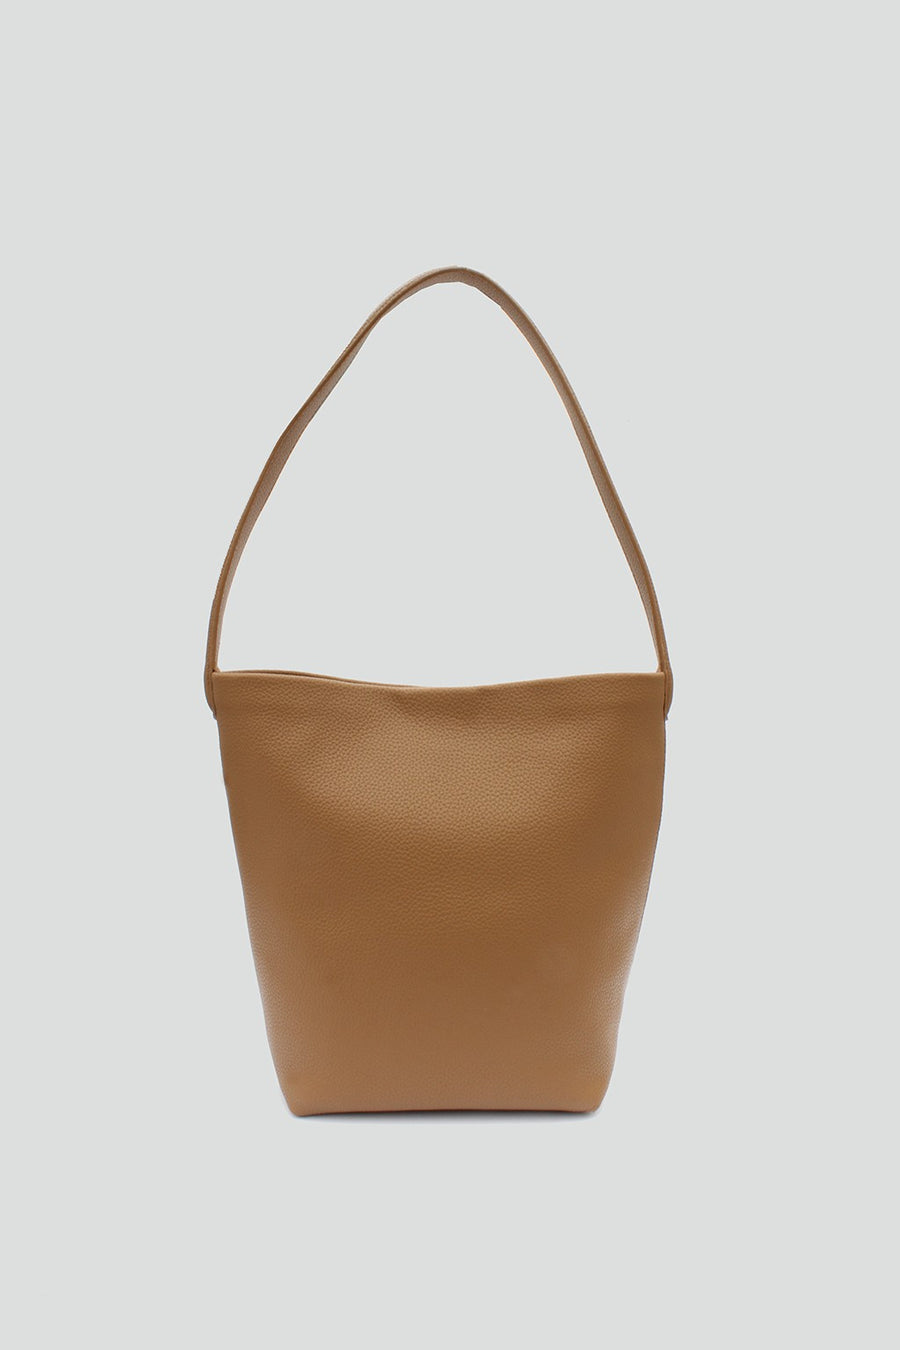 Featuring a classic tote style bag with magnetic closure and includes a mini pouch in the color tan